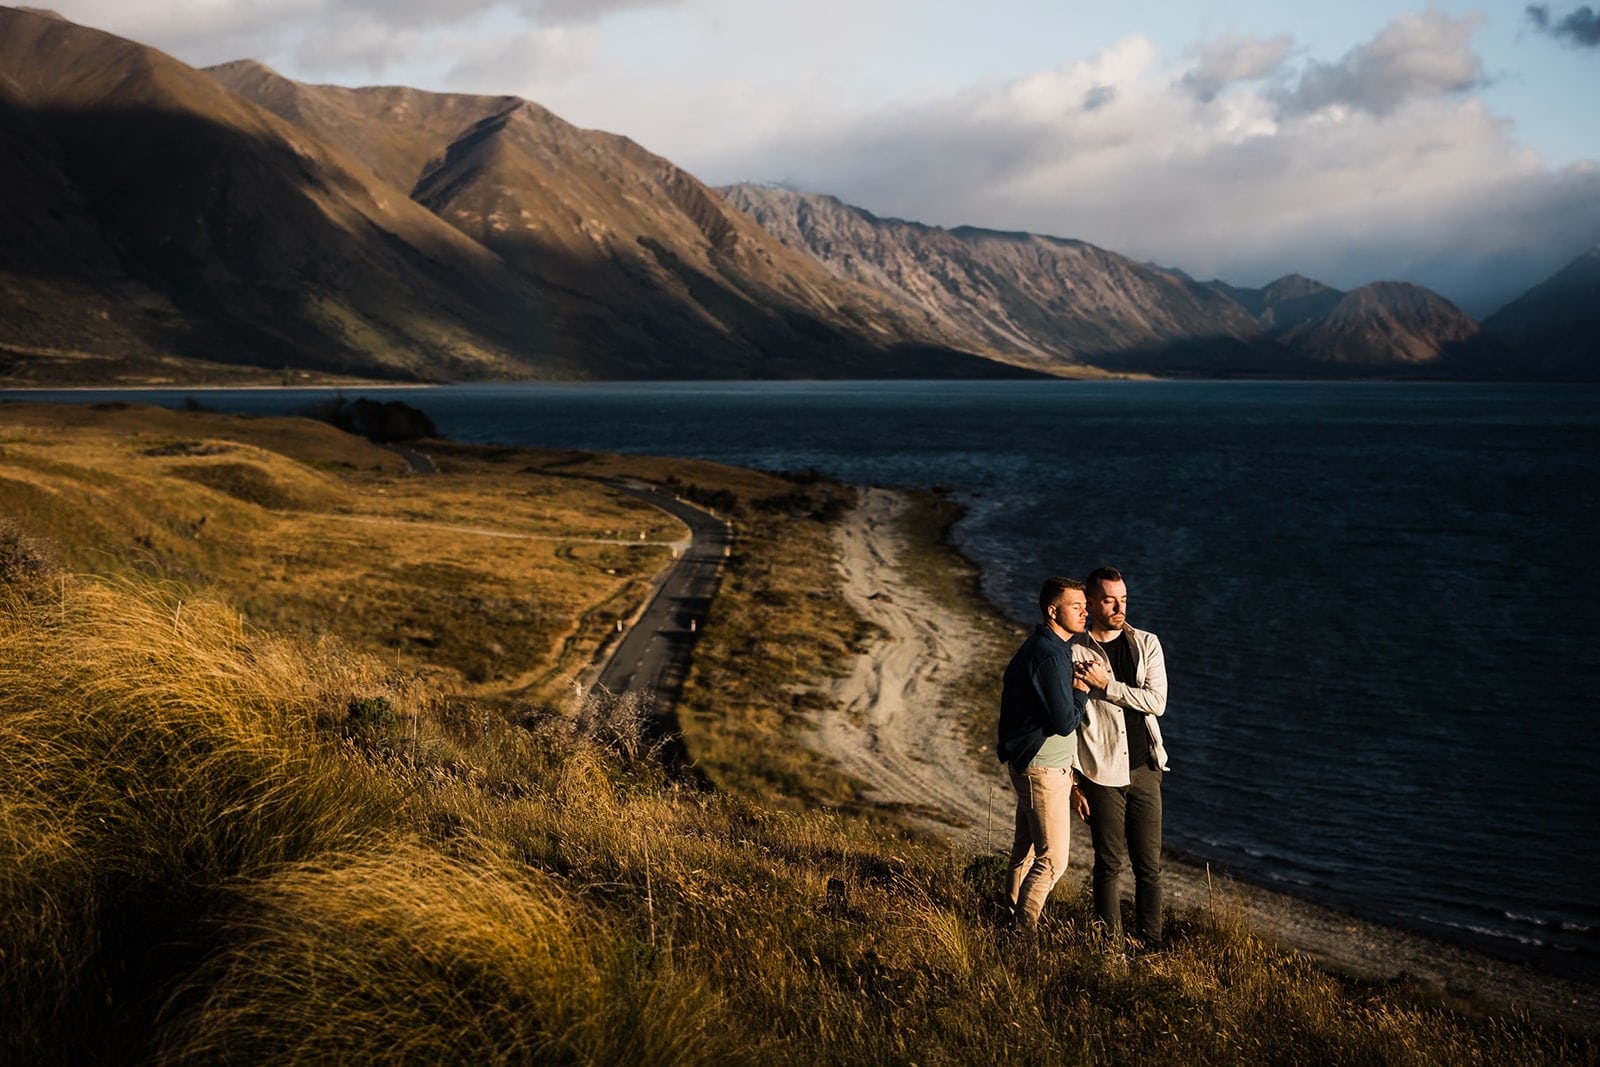 Two men hug while looking out over the water during their adventure photo session in New Zealand